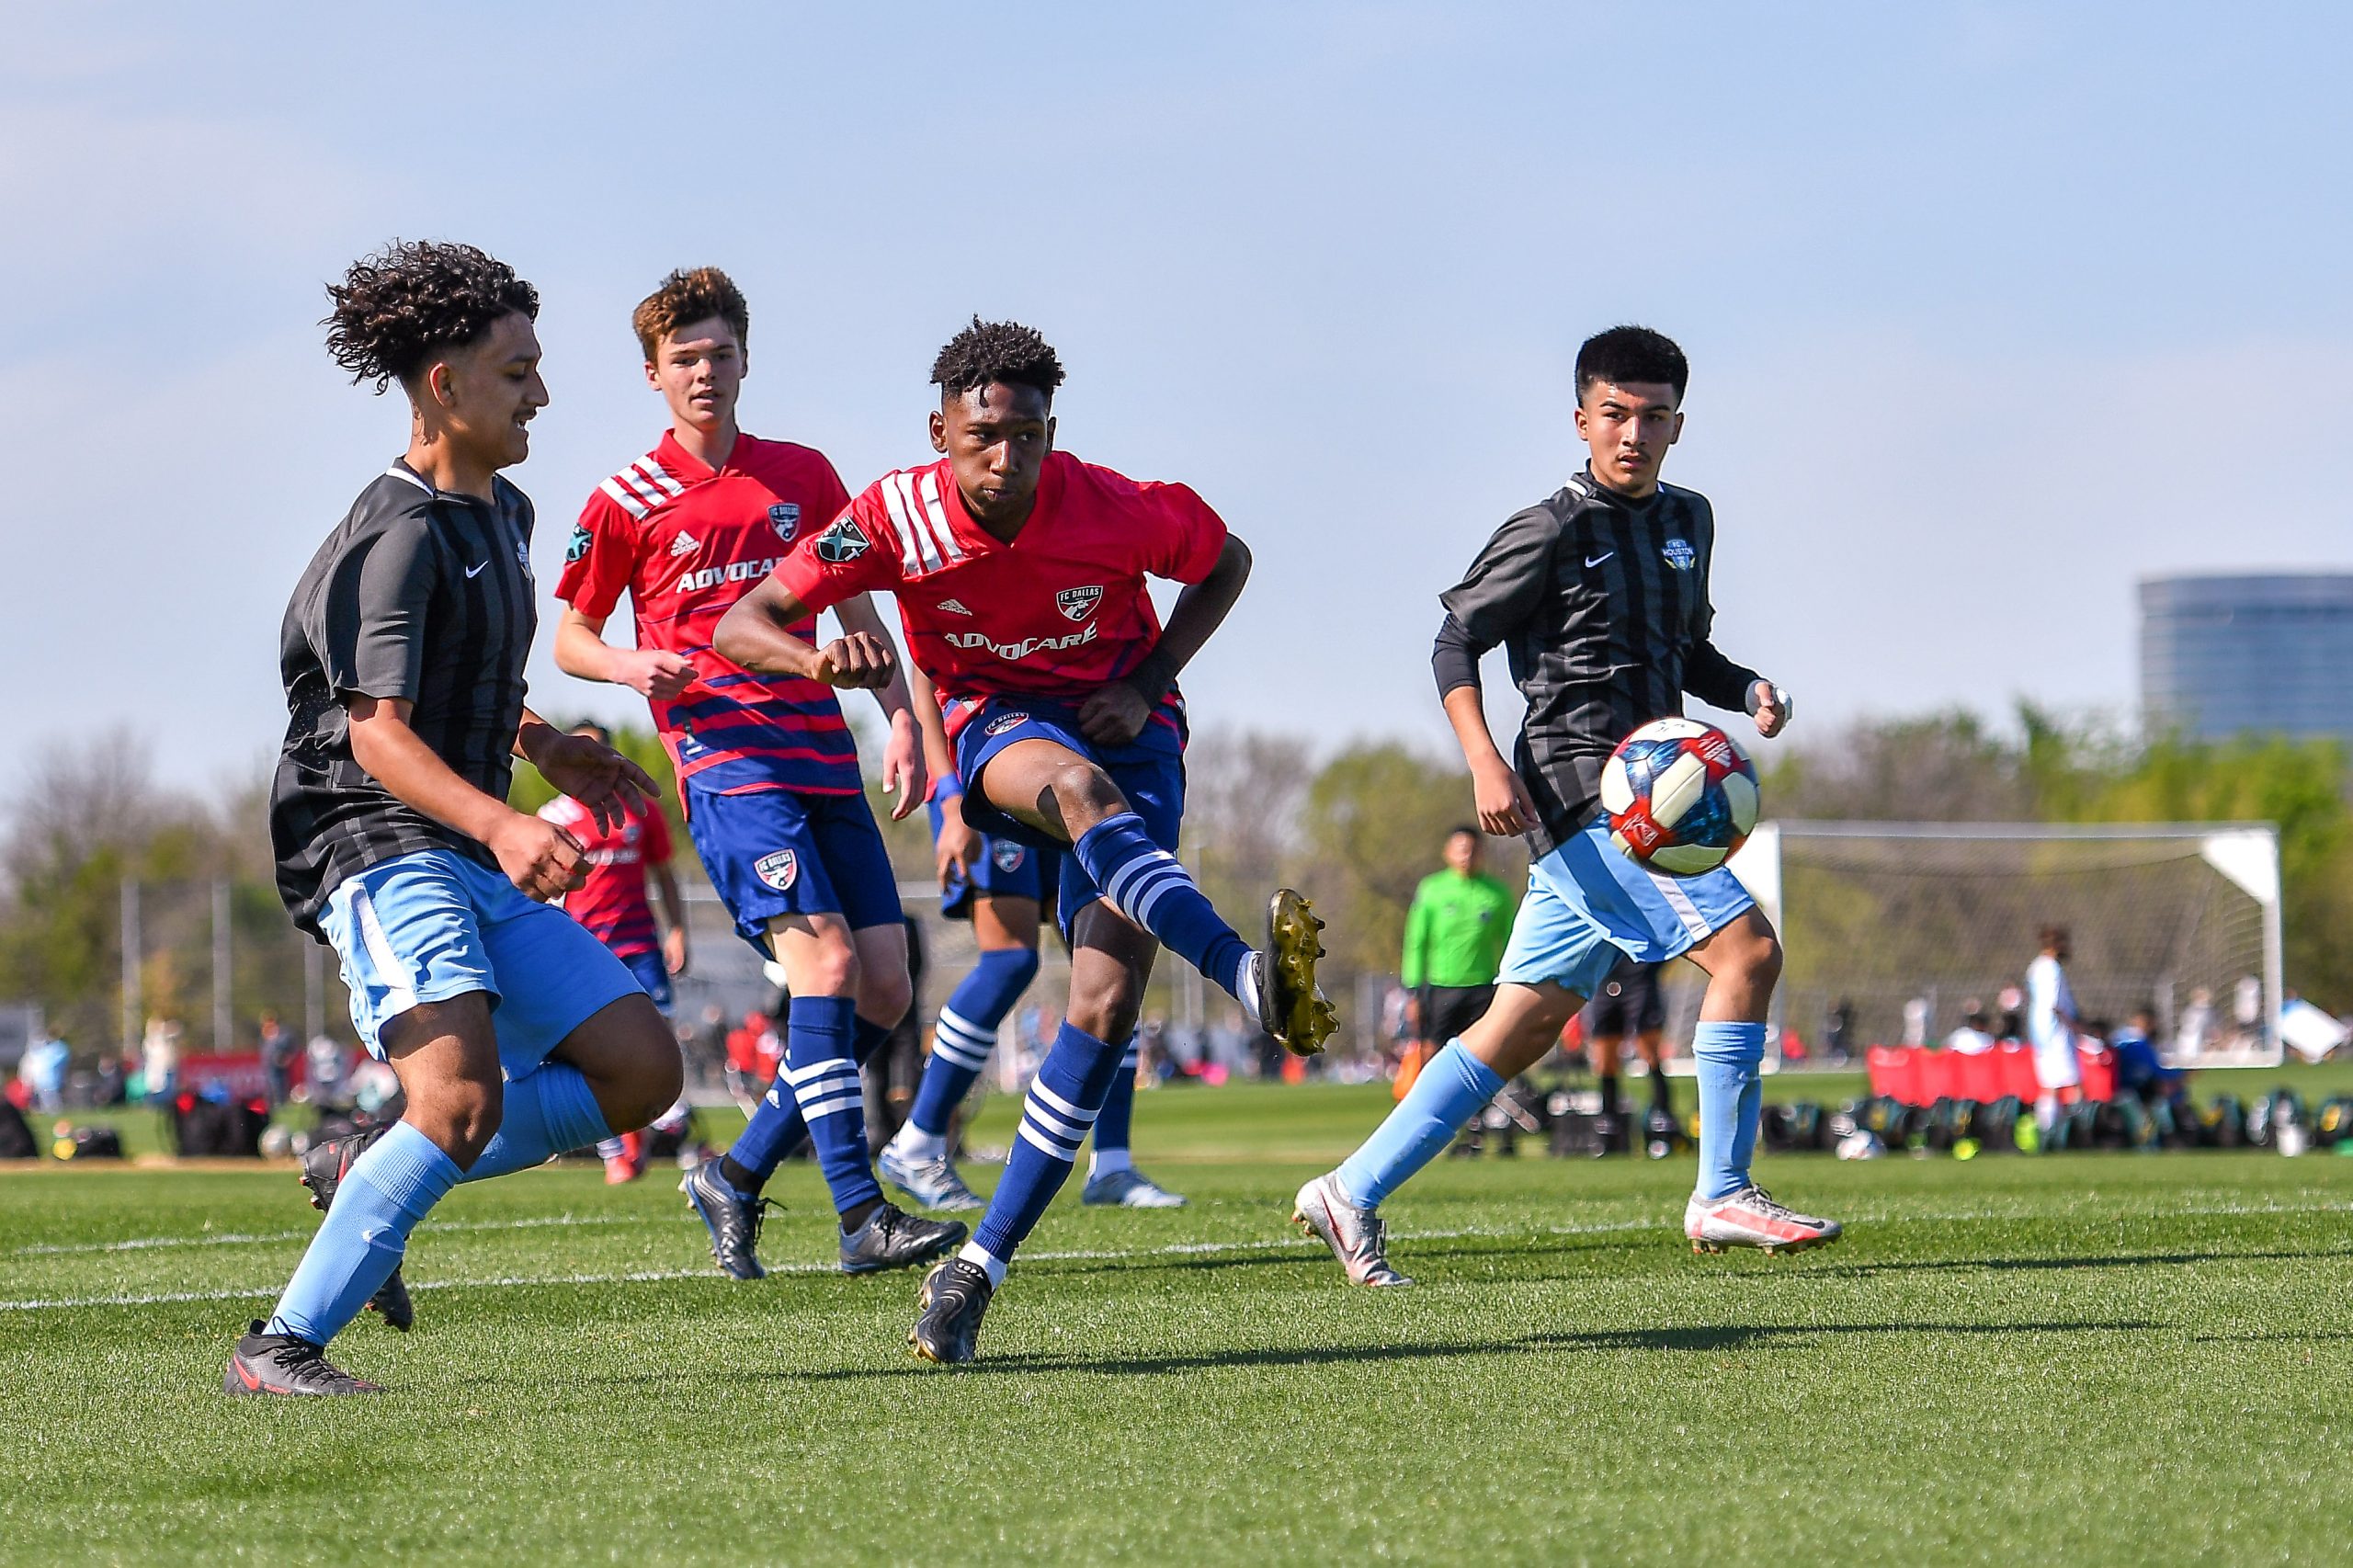 Kristian Kelley shot on goal in the Dallas Cup match against FC Houston Pro.